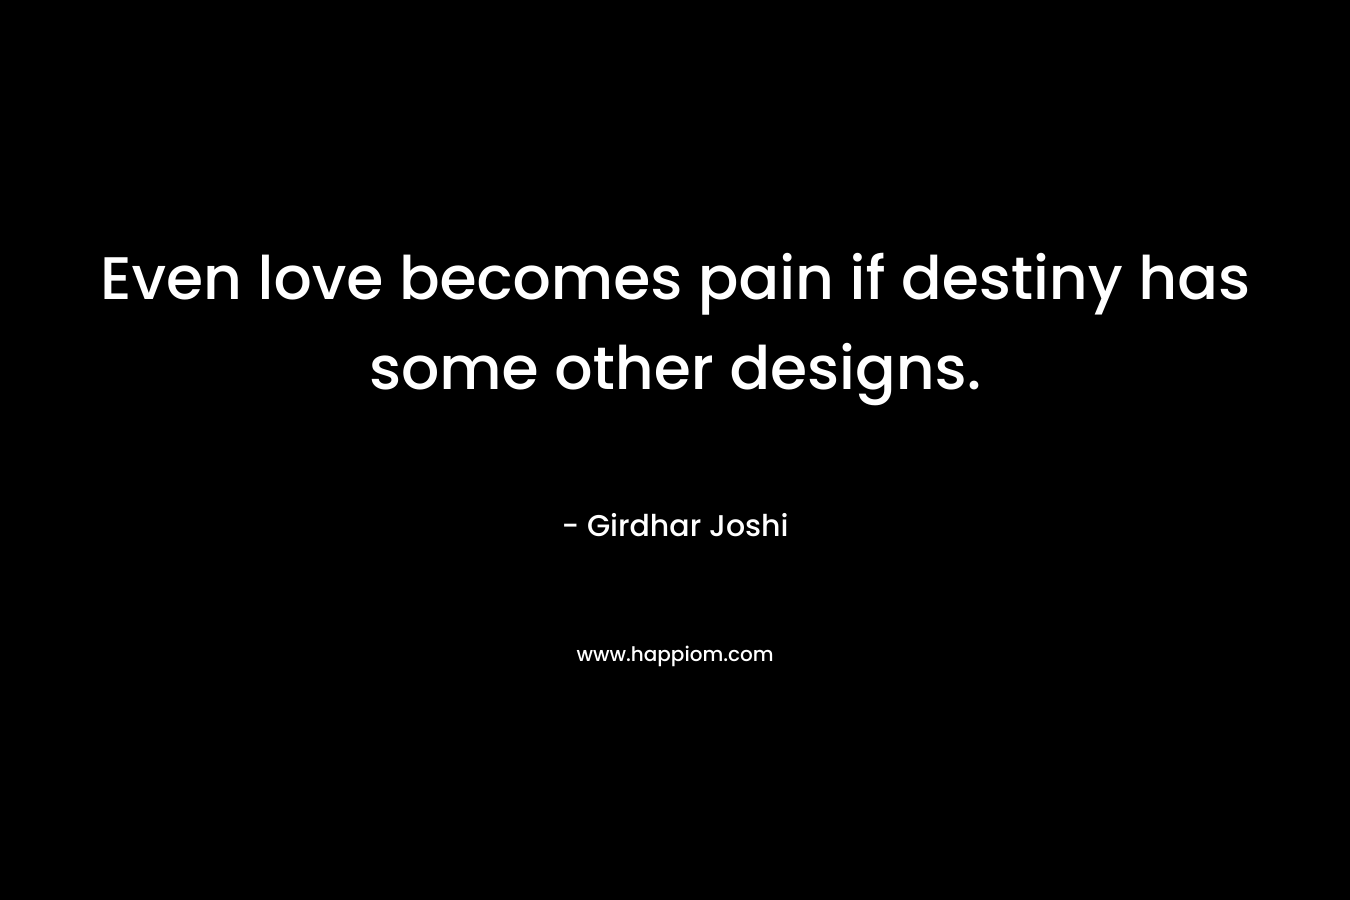 Even love becomes pain if destiny has some other designs.